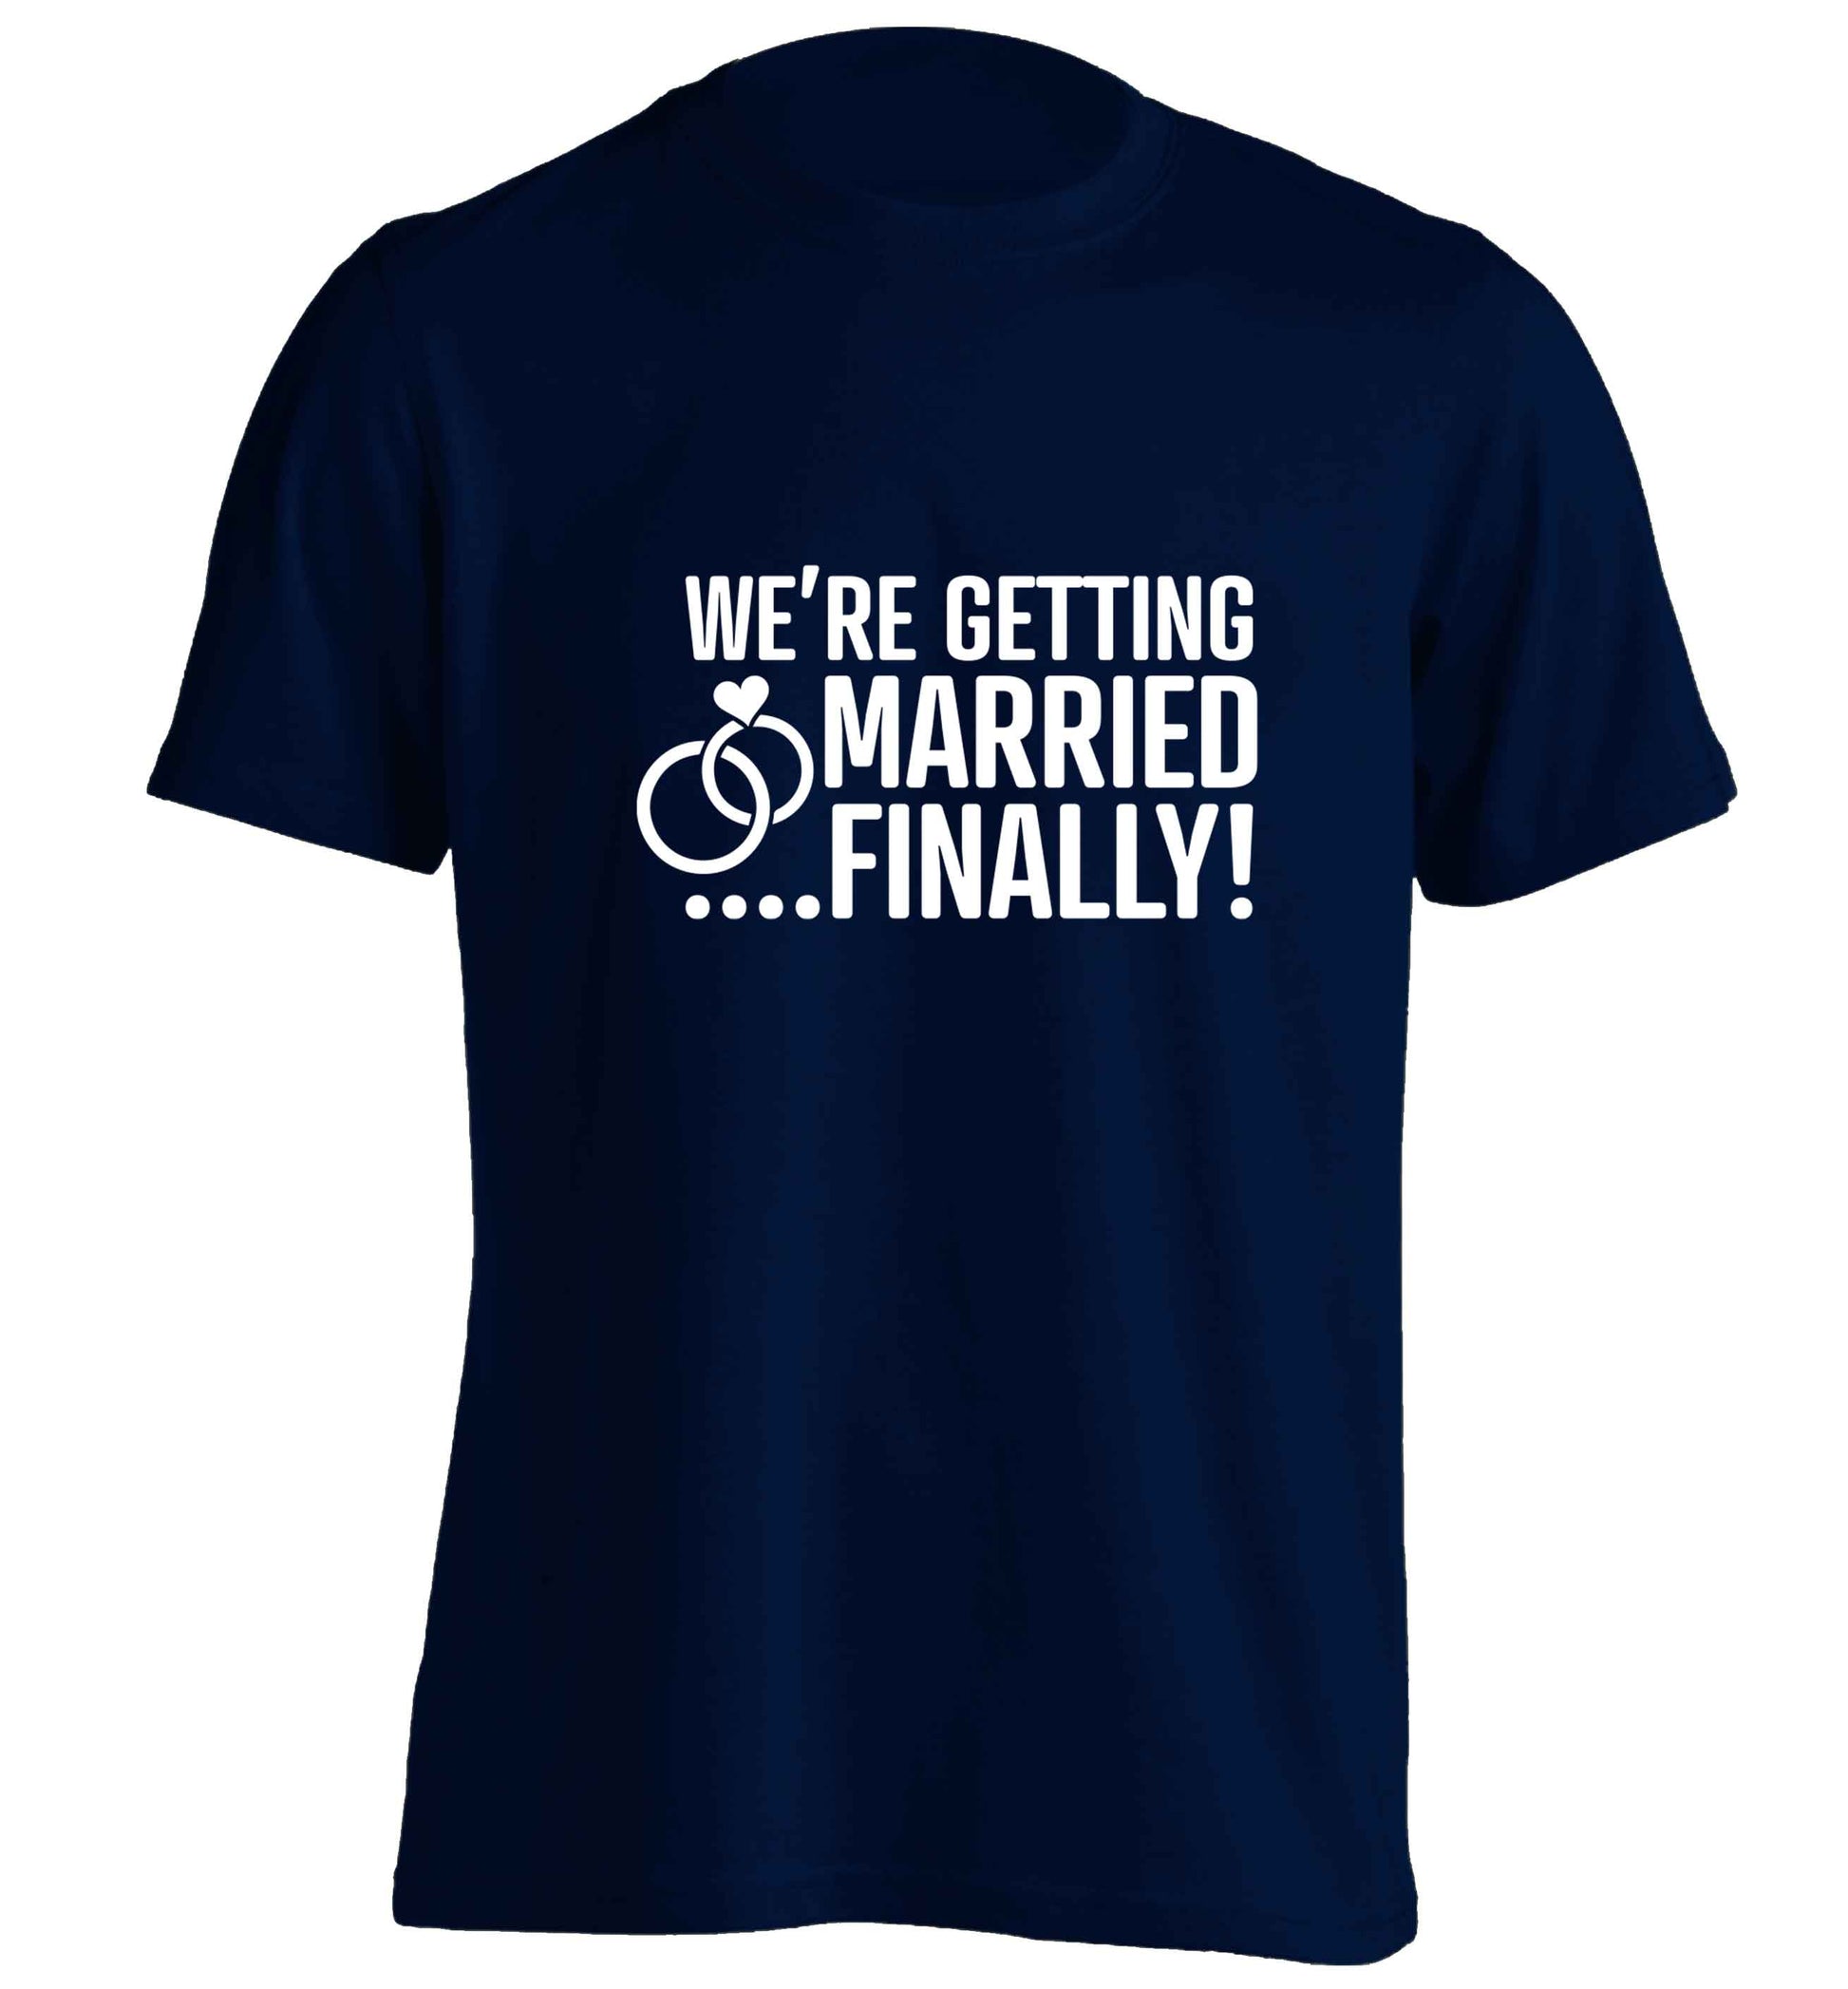 It's been a long wait but it's finally happening! Let everyone know you're celebrating your big day soon! adults unisex navy Tshirt 2XL